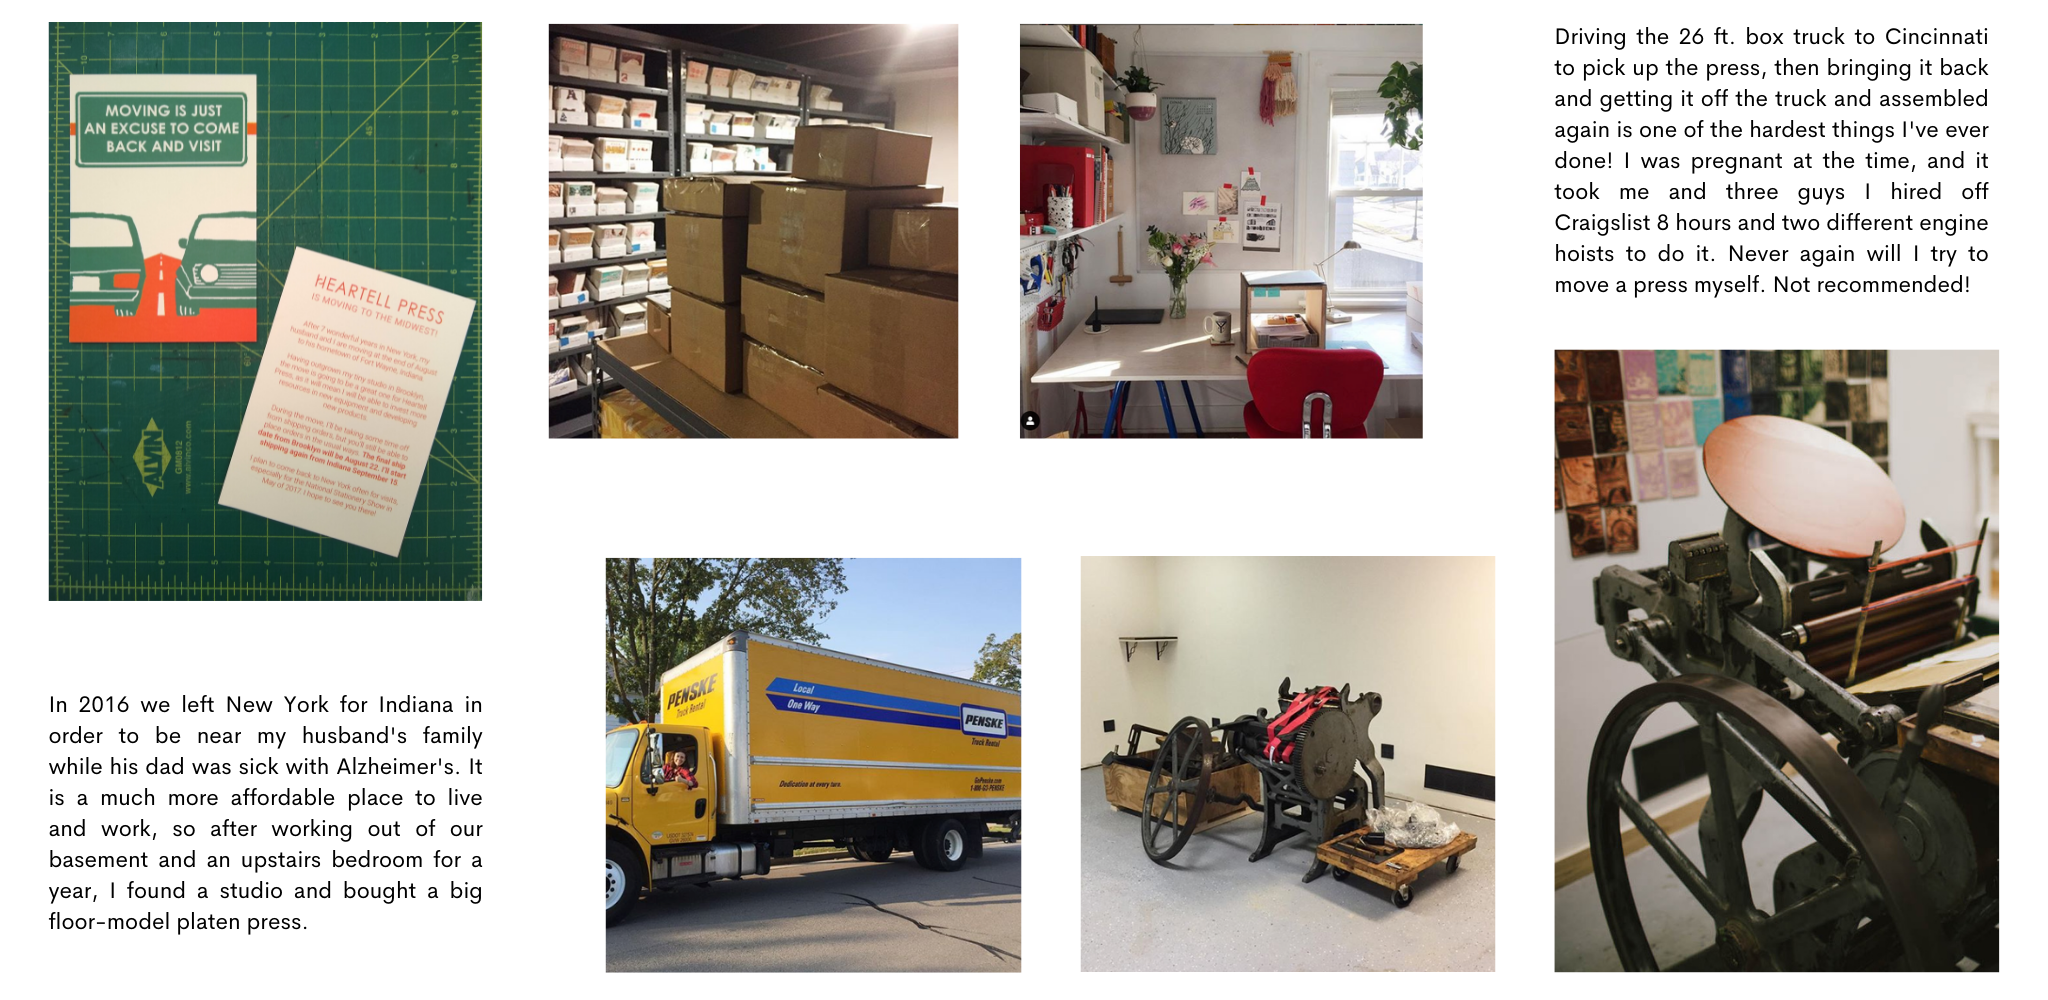 photos of Rachel moving to indiana and buying a bigger C&P floor model press